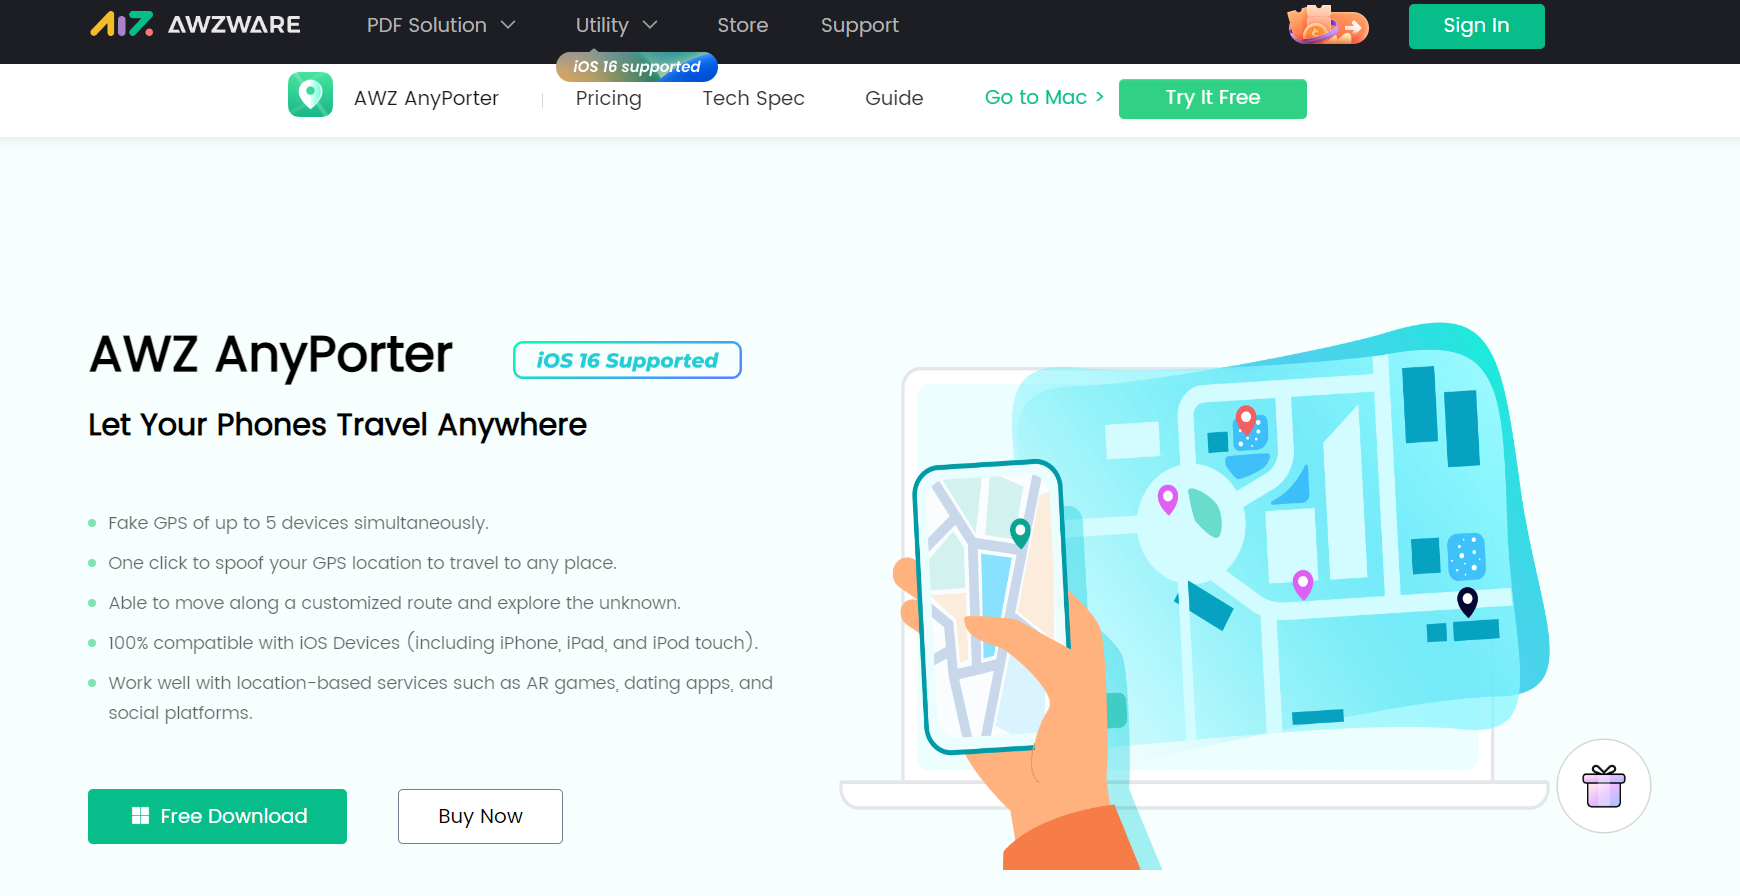 awz anyporter site overview